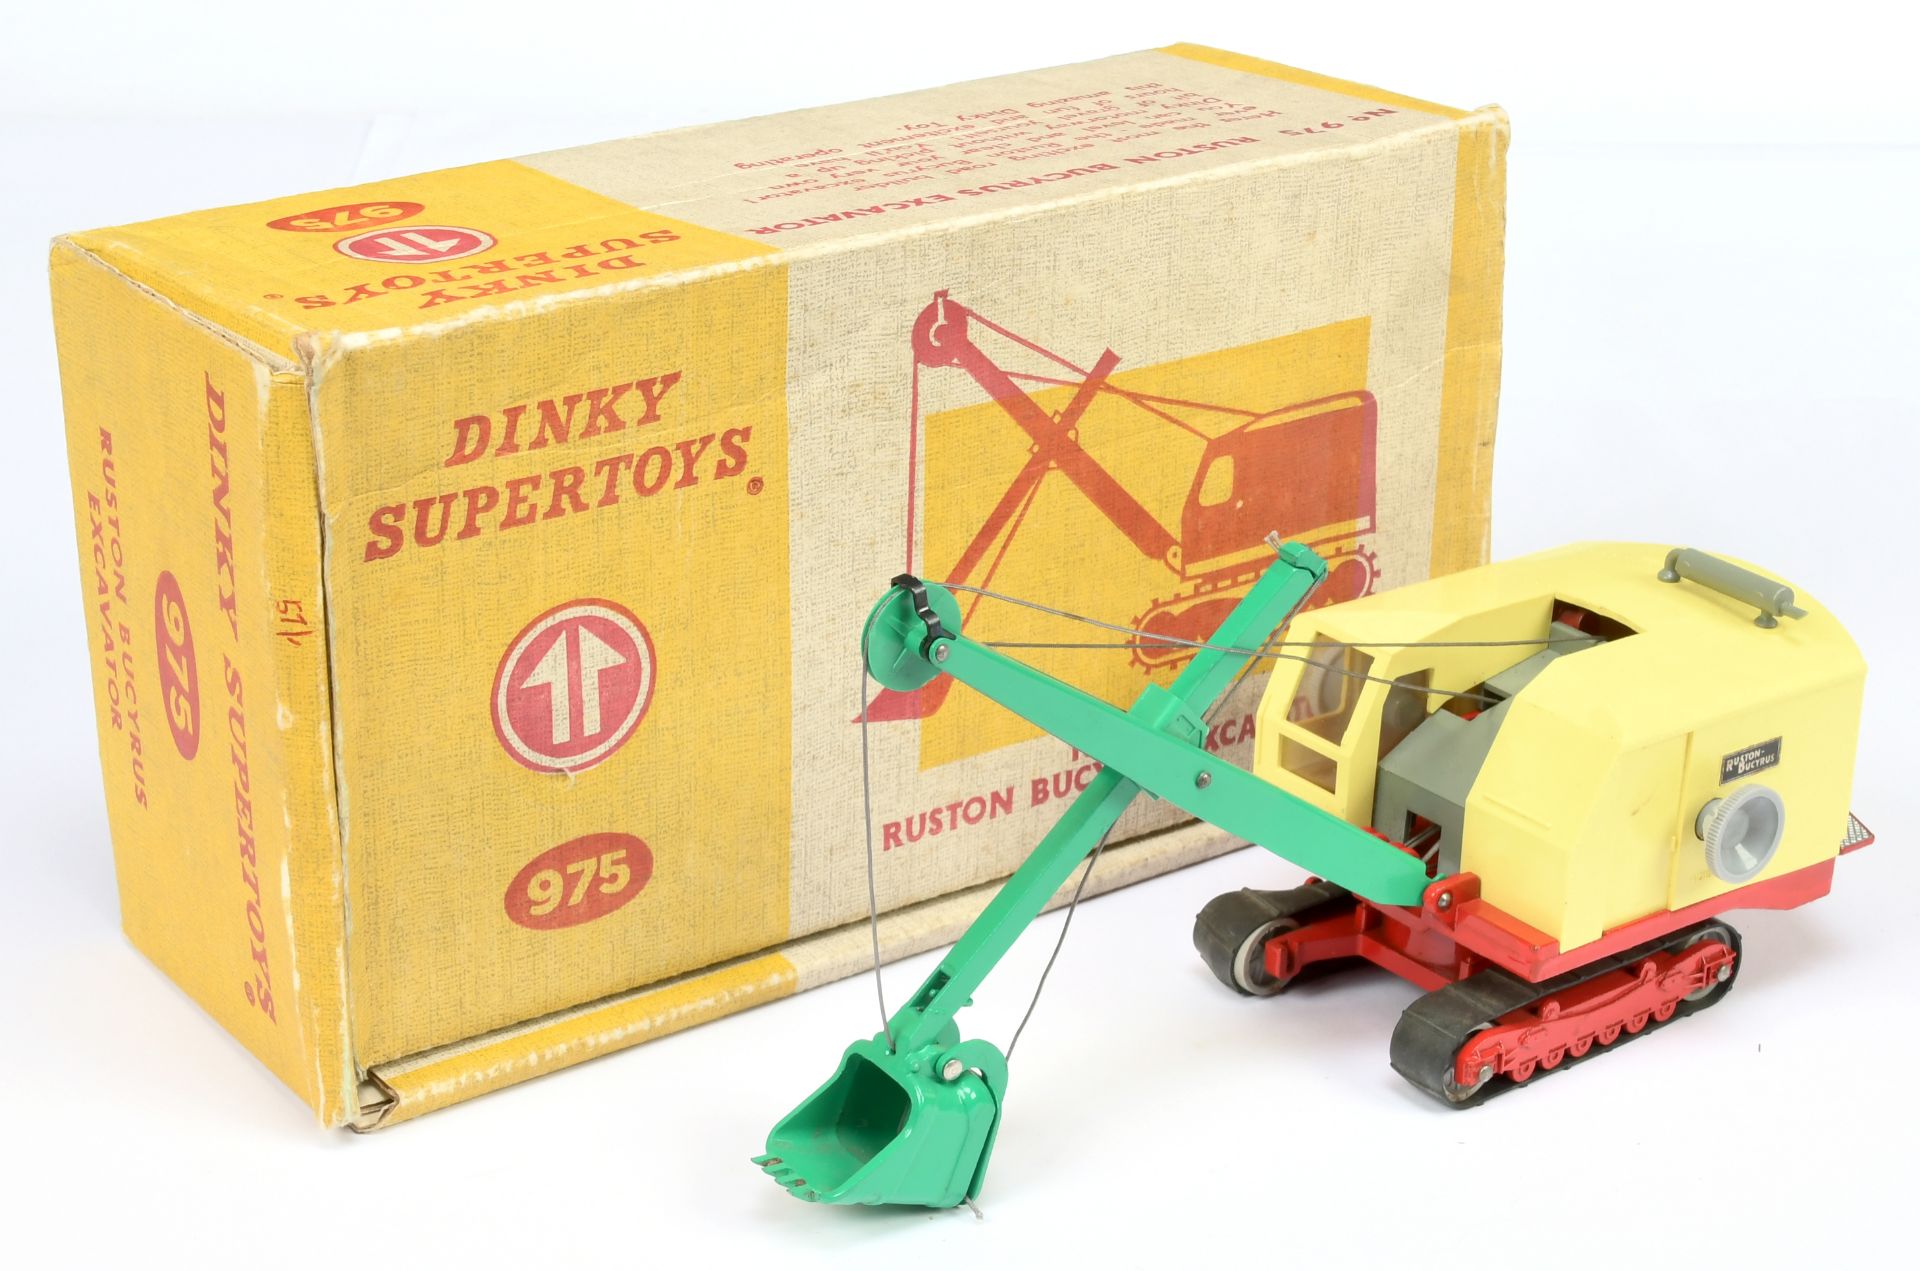 Dinky Toys 975 Ruston Bucyrus Excavator - Plastic yellow body, green jib and shovel, red base, gr...